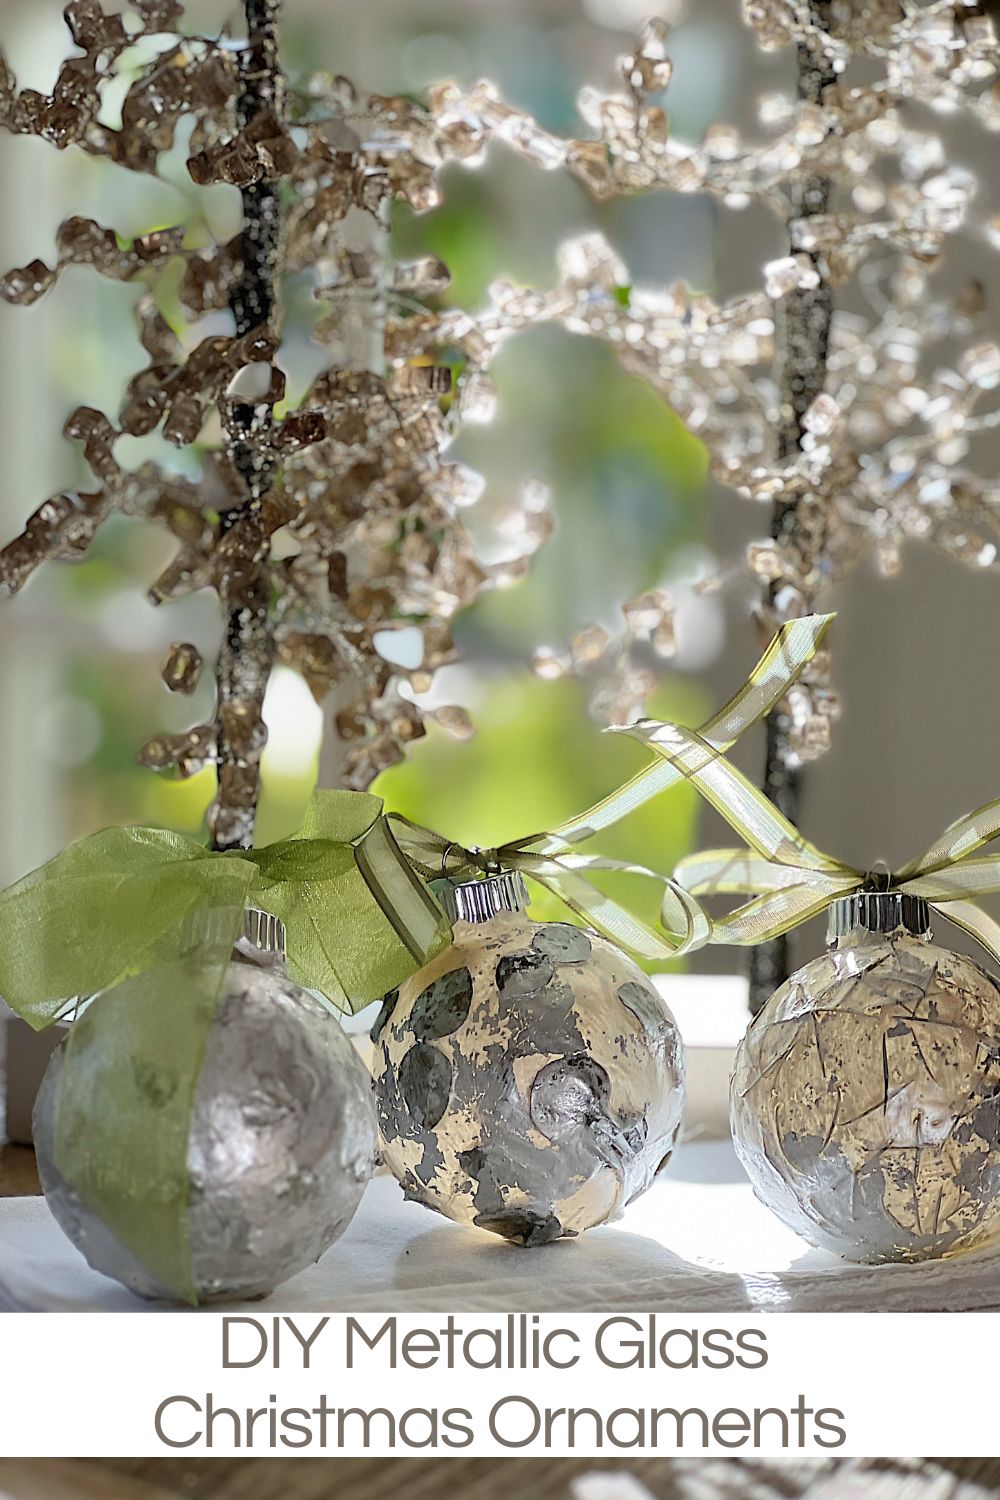 As the holiday season approaches, try adding a personal touch to your Christmas decor by creating your own metallic glass Christmas ornaments.